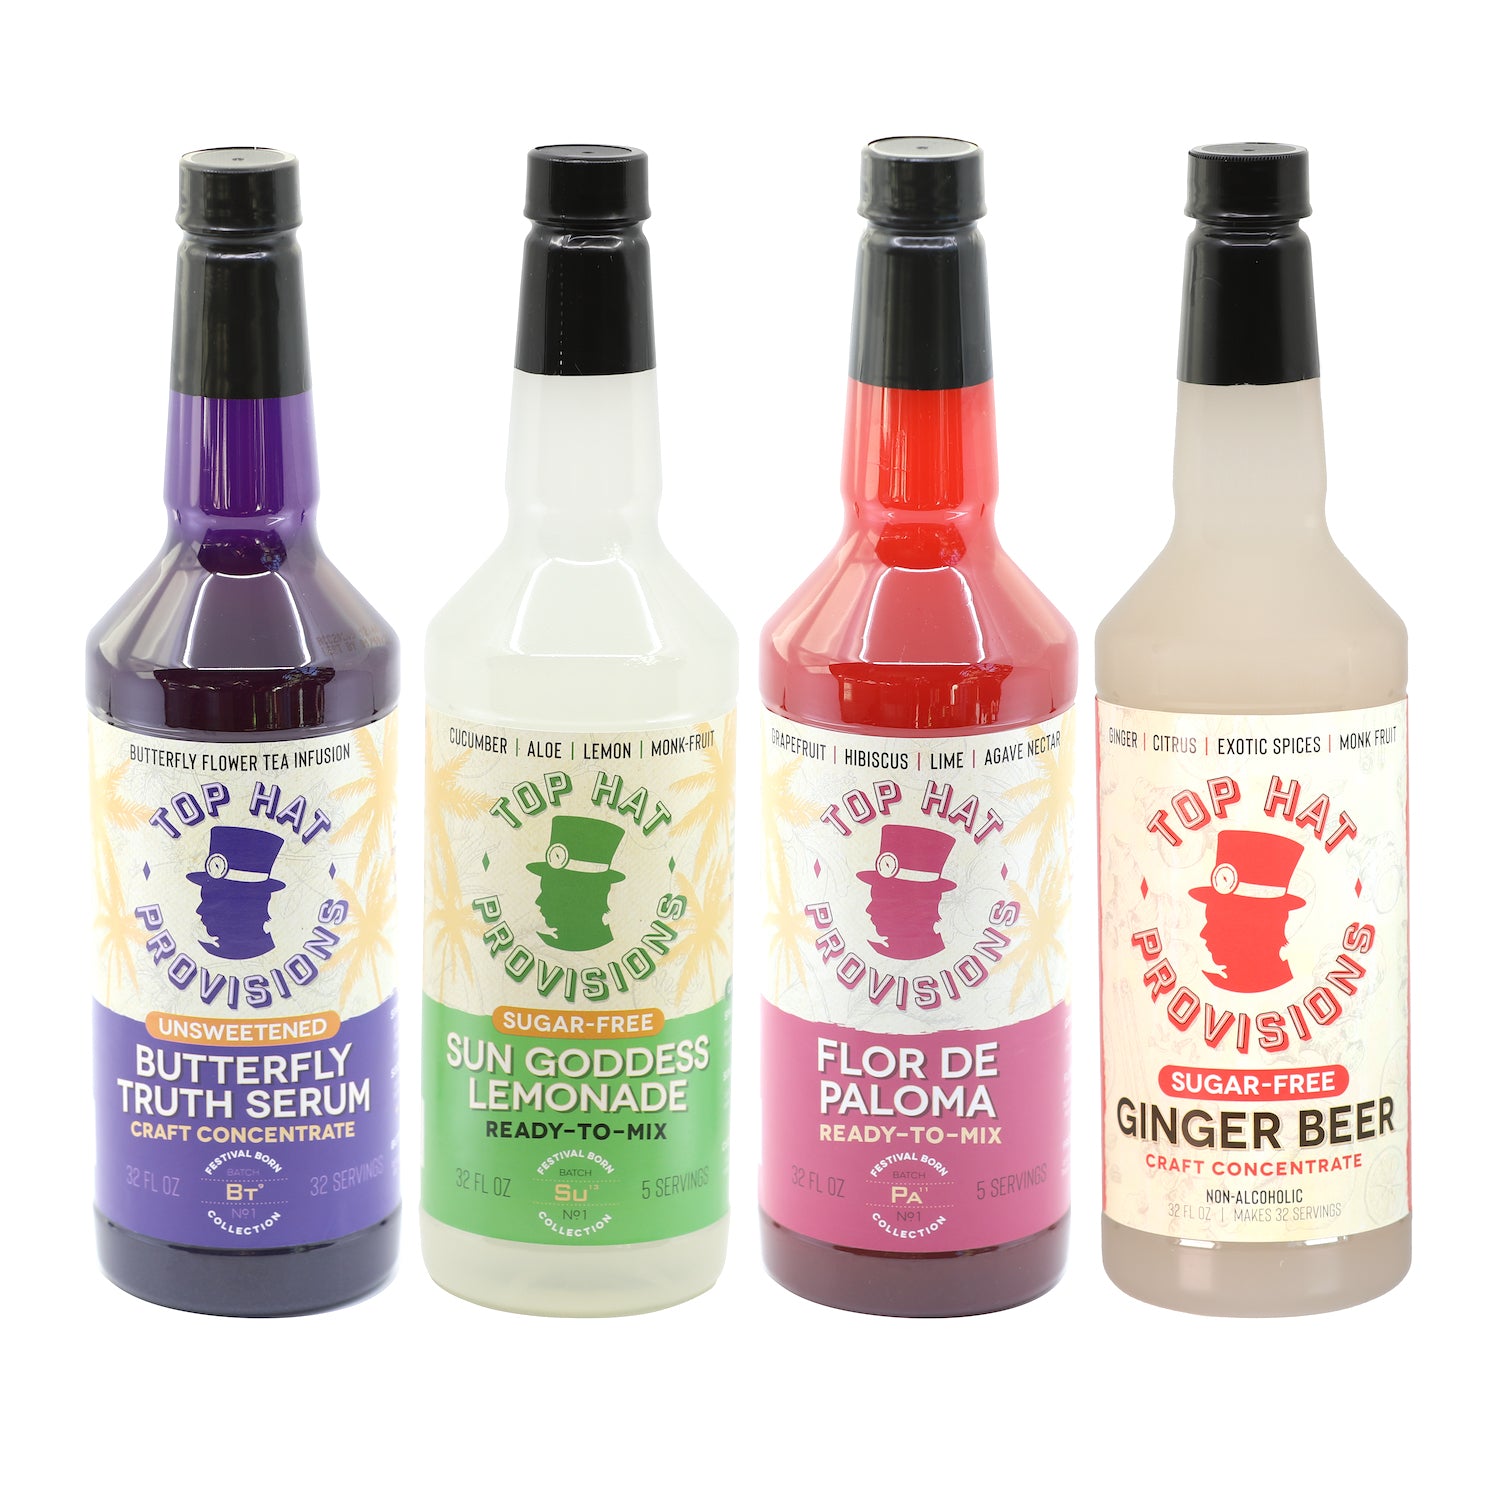 Top Hat Mojave Sister Cocktail Party Combo Kit - 4 pack of 32oz bottles